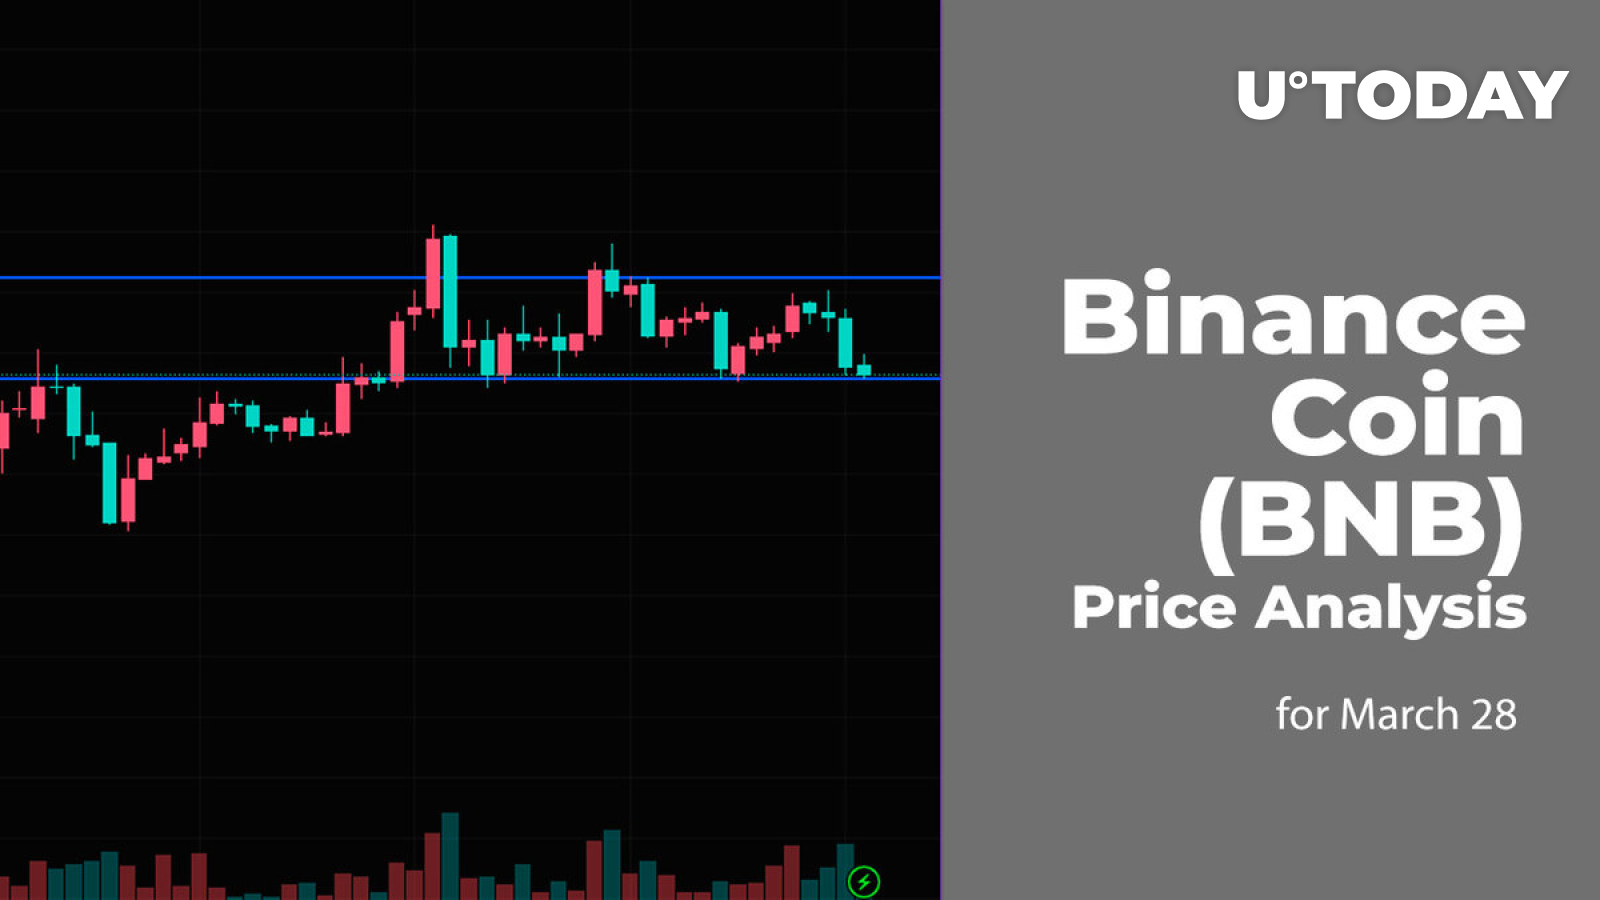 Binance Coin (BNB) Price Analysis for March 28